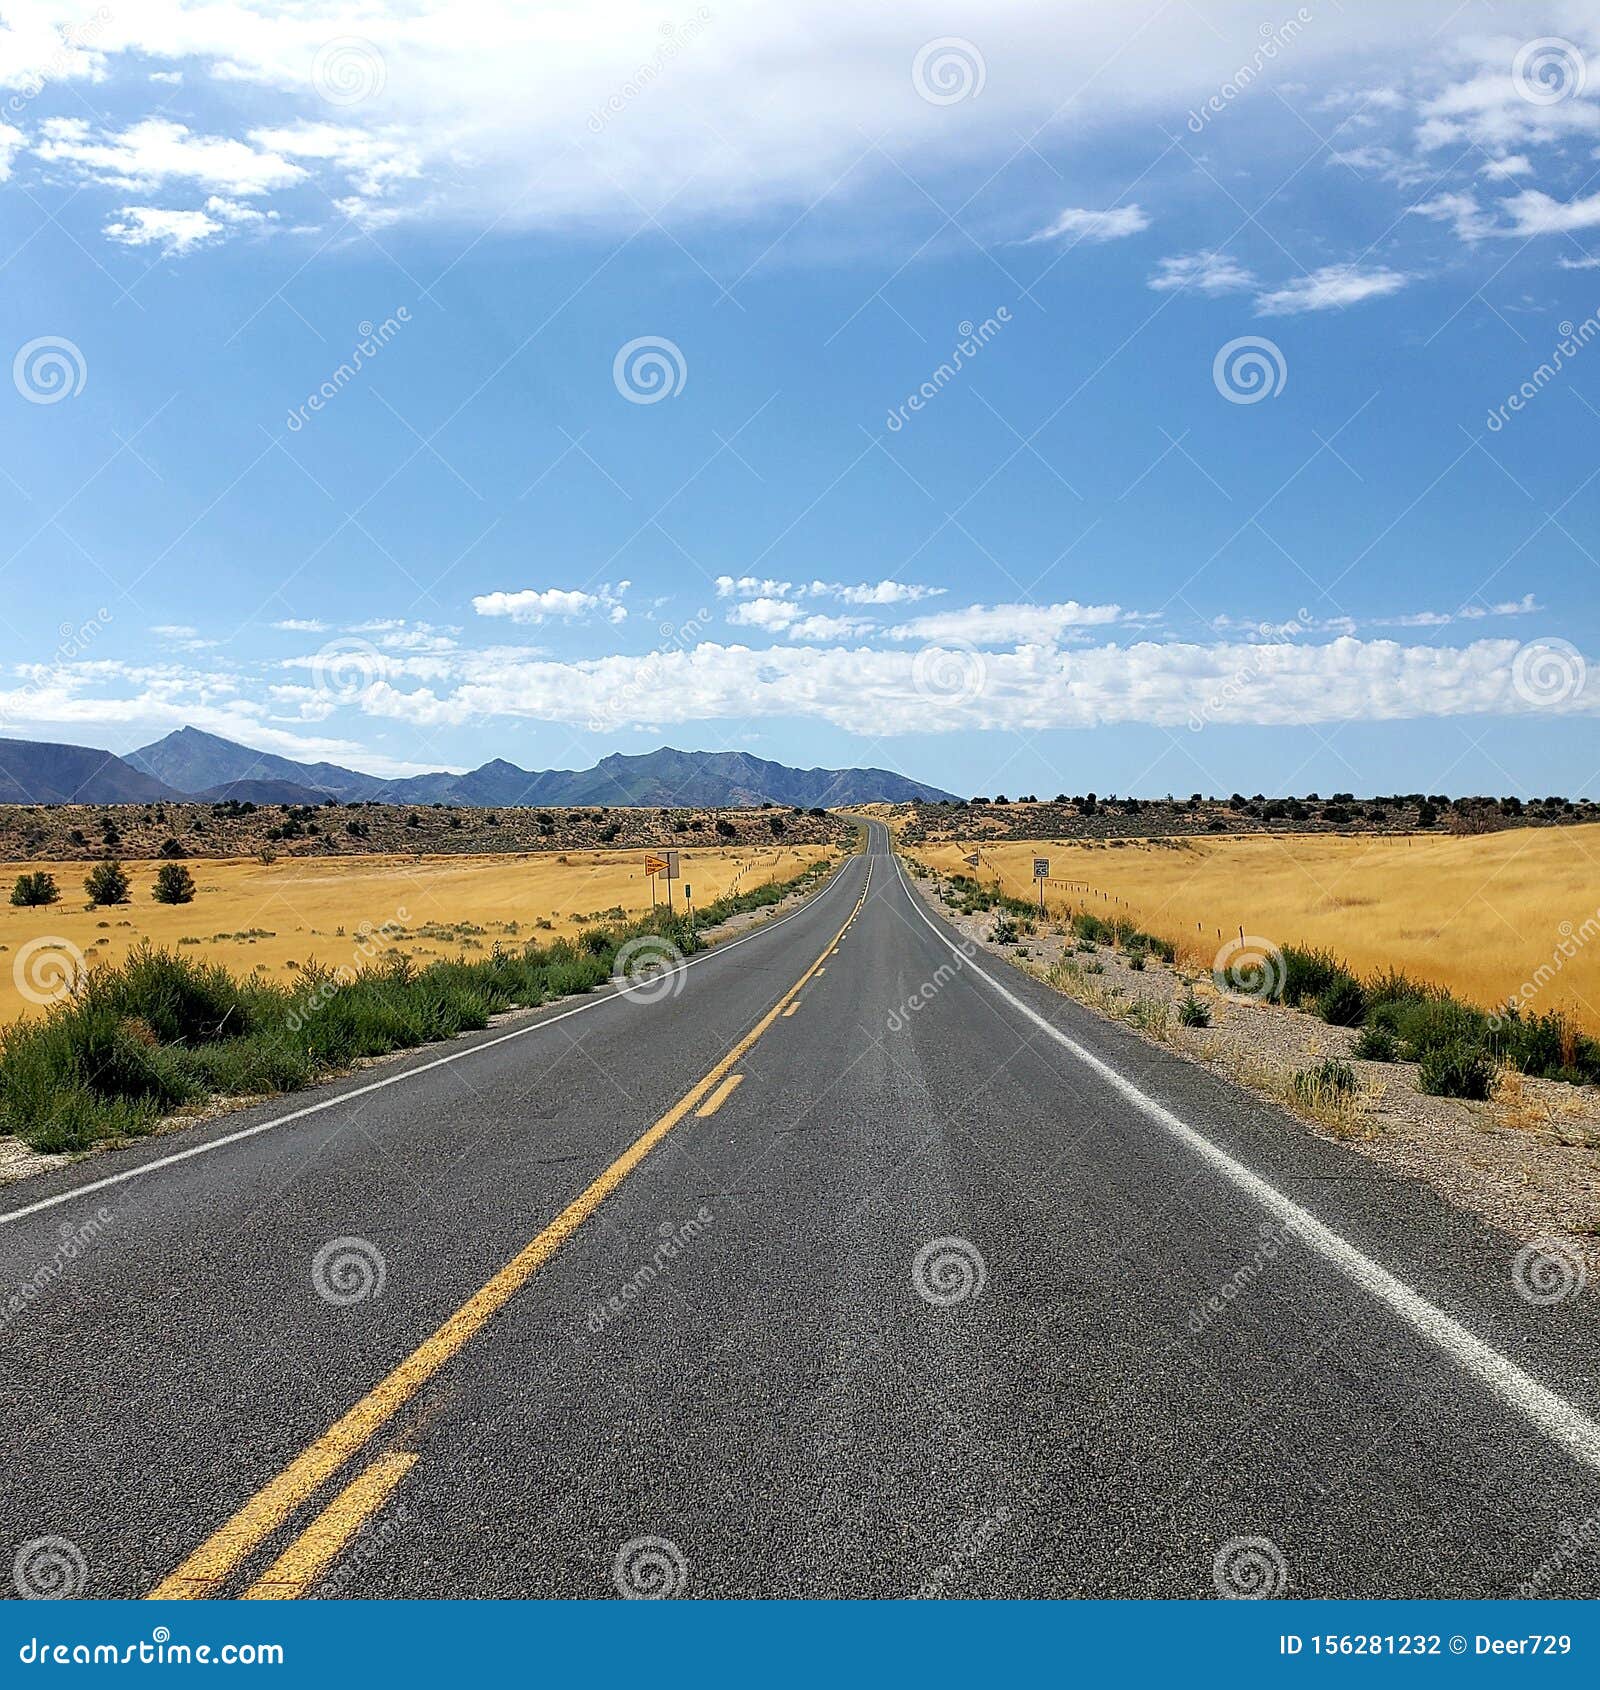 long straight distance on the rural road